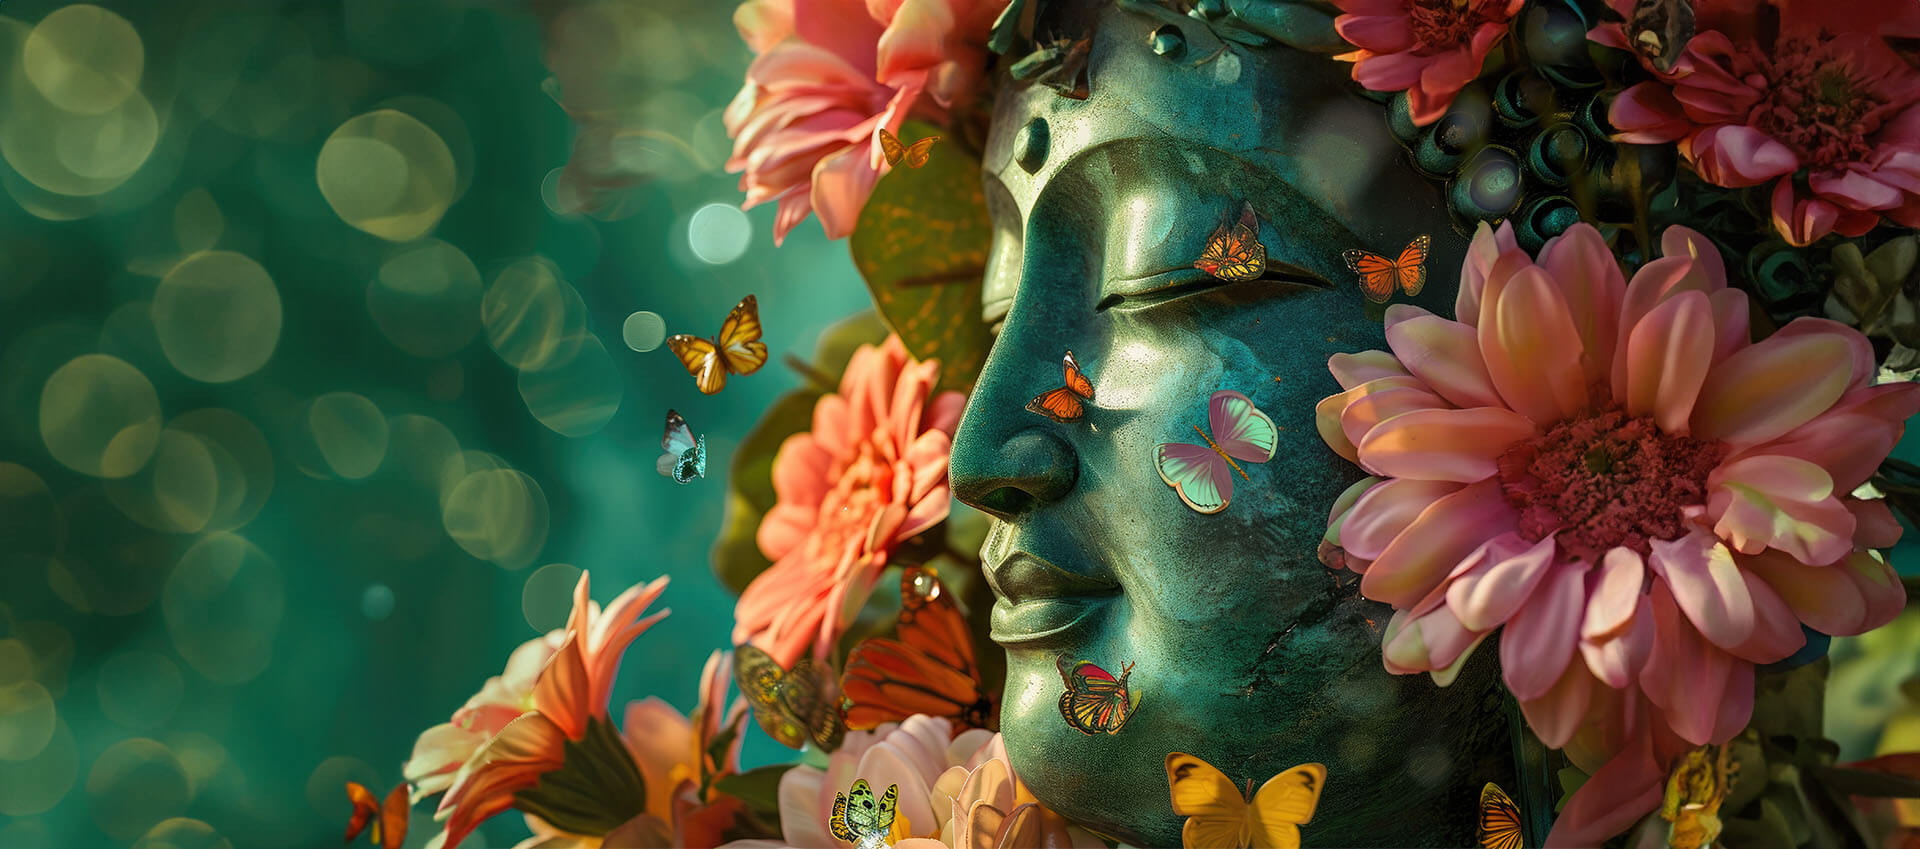 Dreamscape illustration of a woman surrounded by flowers and butterflies